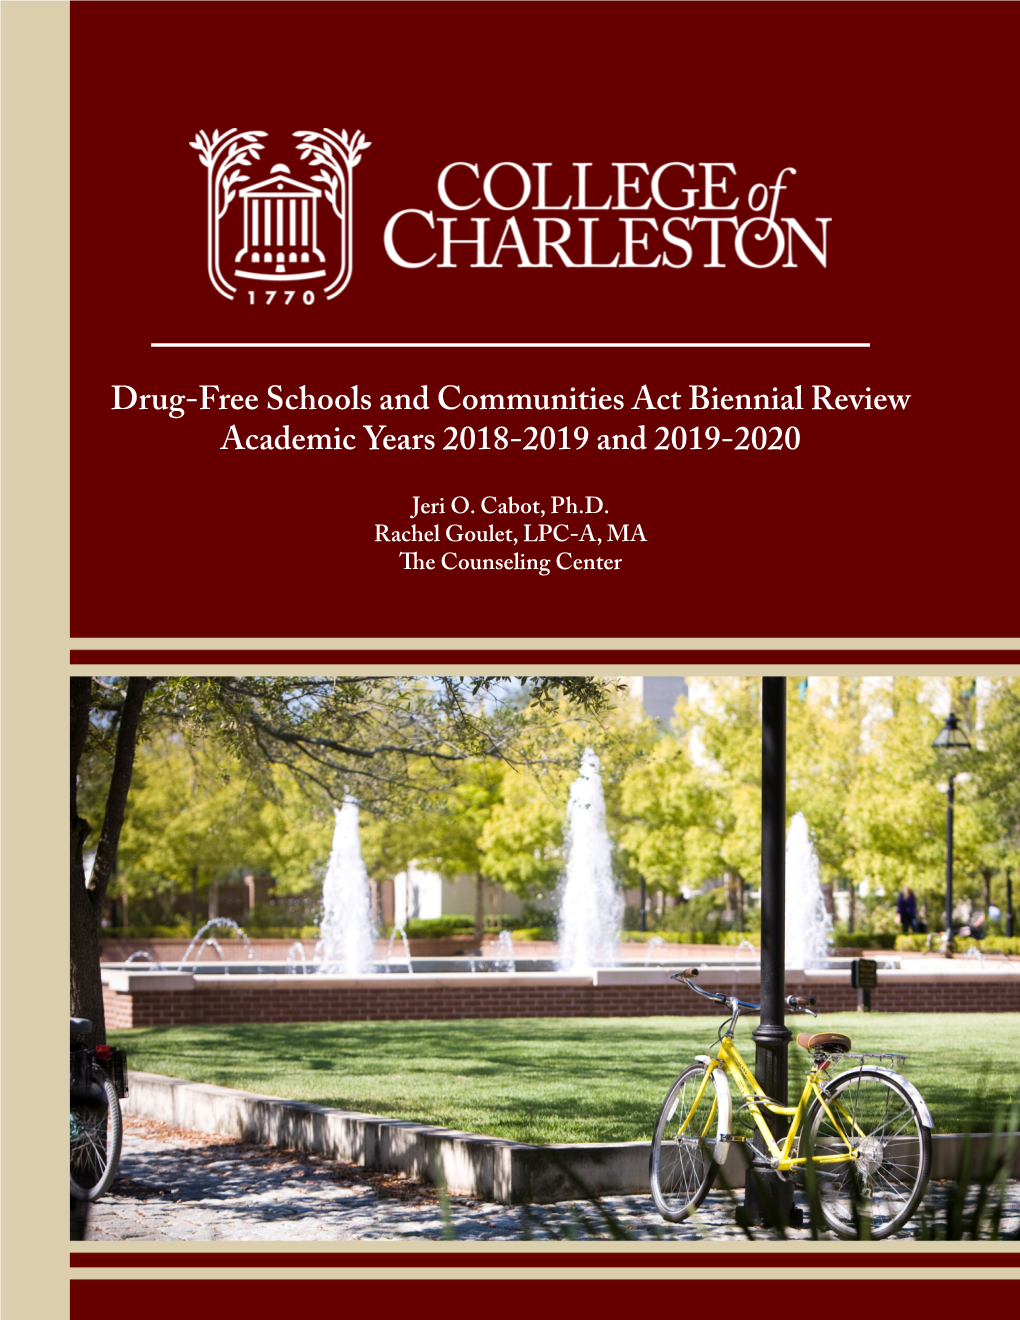 Drug-Free Schools and Communities Act Biennial Review Academic Years 2018-2019 and 2019-2020